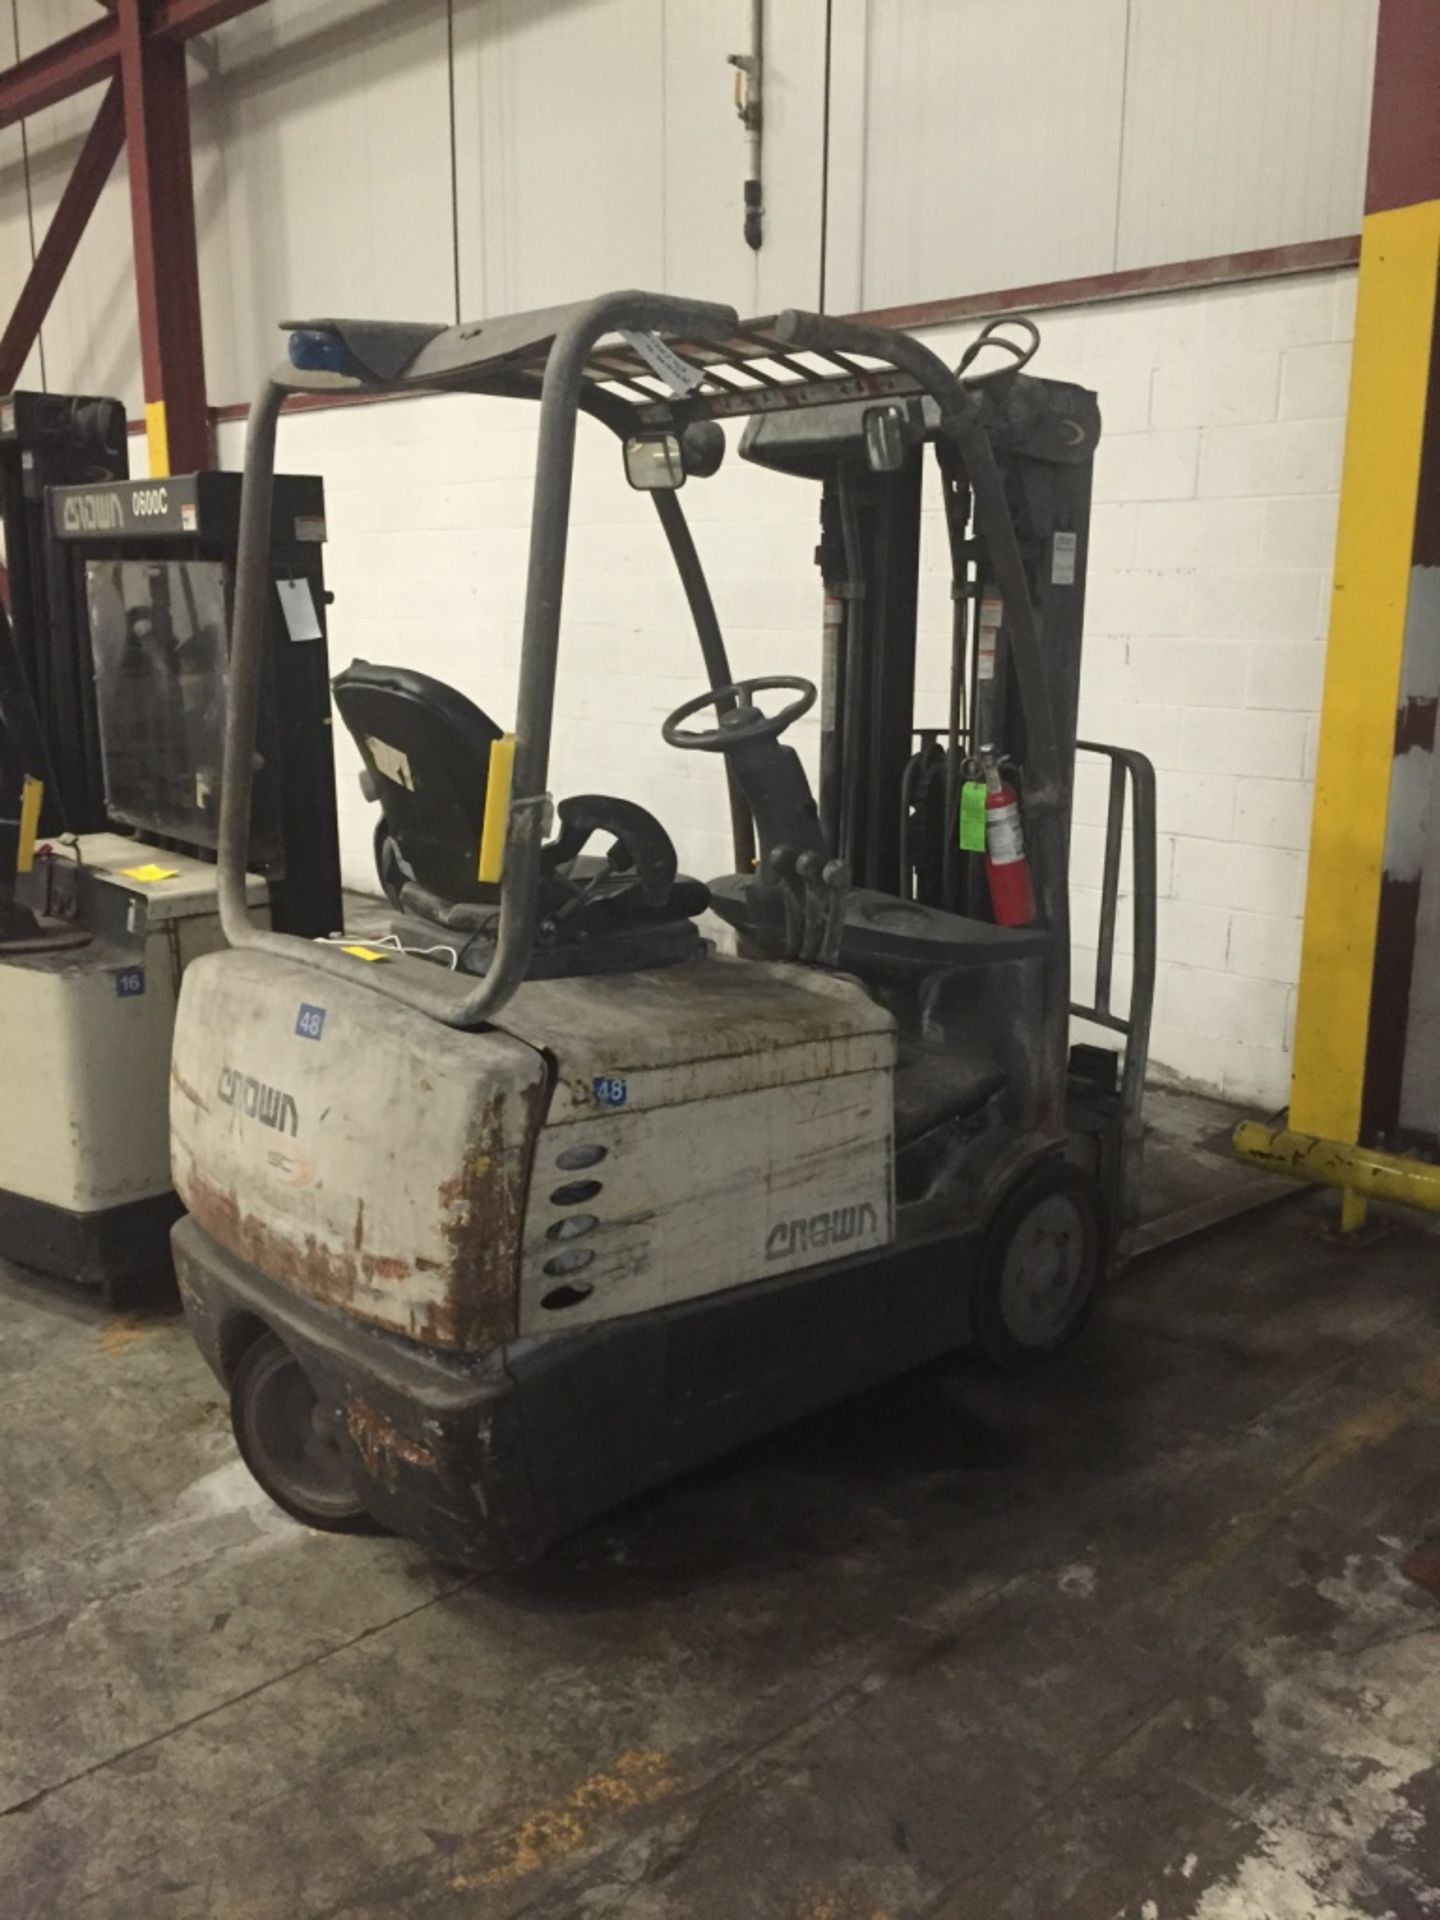 Crown Electric Fork Truck, Rigging Fee $75, If Crating or Lumber is Needed Add $50